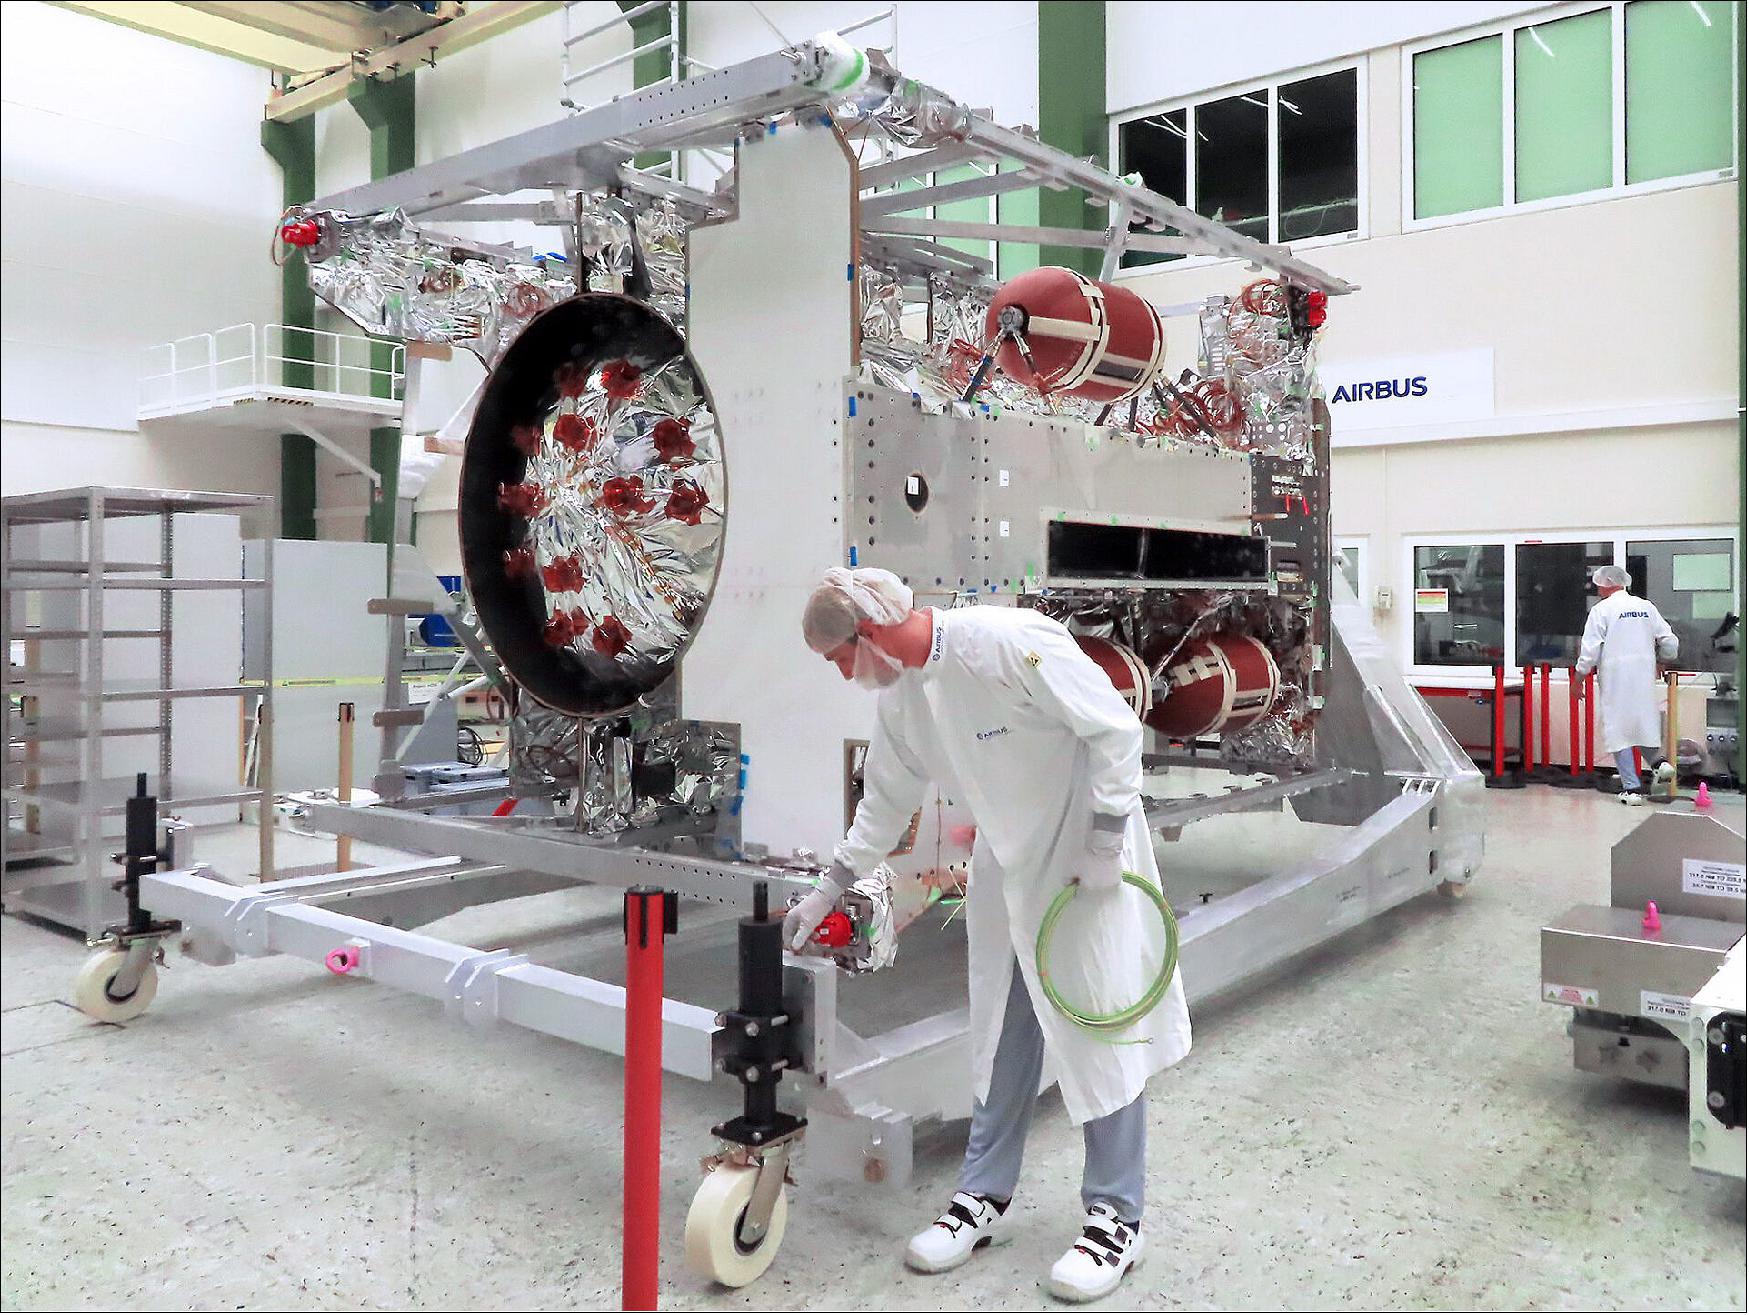 Figure 17: The 5.2-ton spacecraft will be fitted with remaining components such as power electronics, an on-board computer, communication systems and navigation sensors, before continuing its journey to ESTEC (ESA Space Technology and Research Center) in the Netherlands for testing (image credit: Airbus)